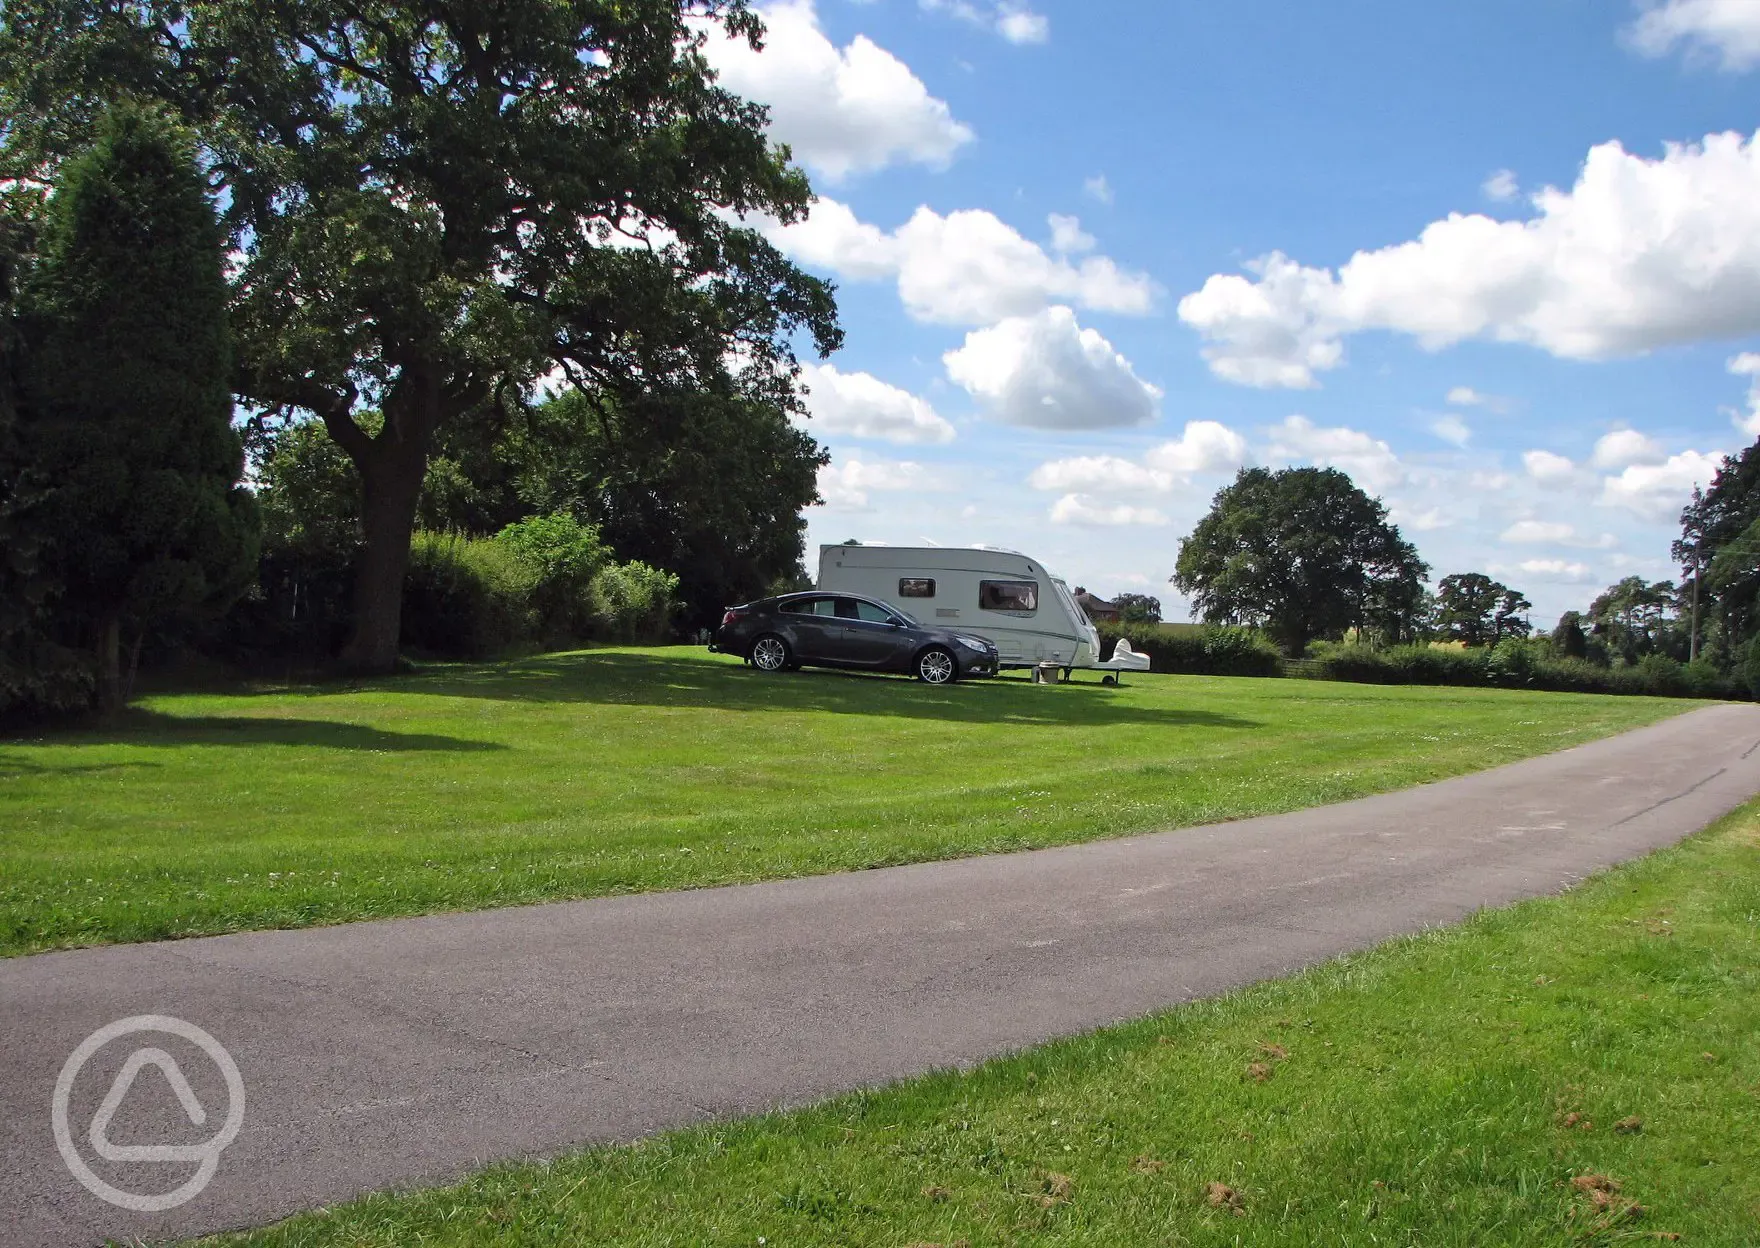 Caravan pitches at Birch Hill Farm Certificated Location